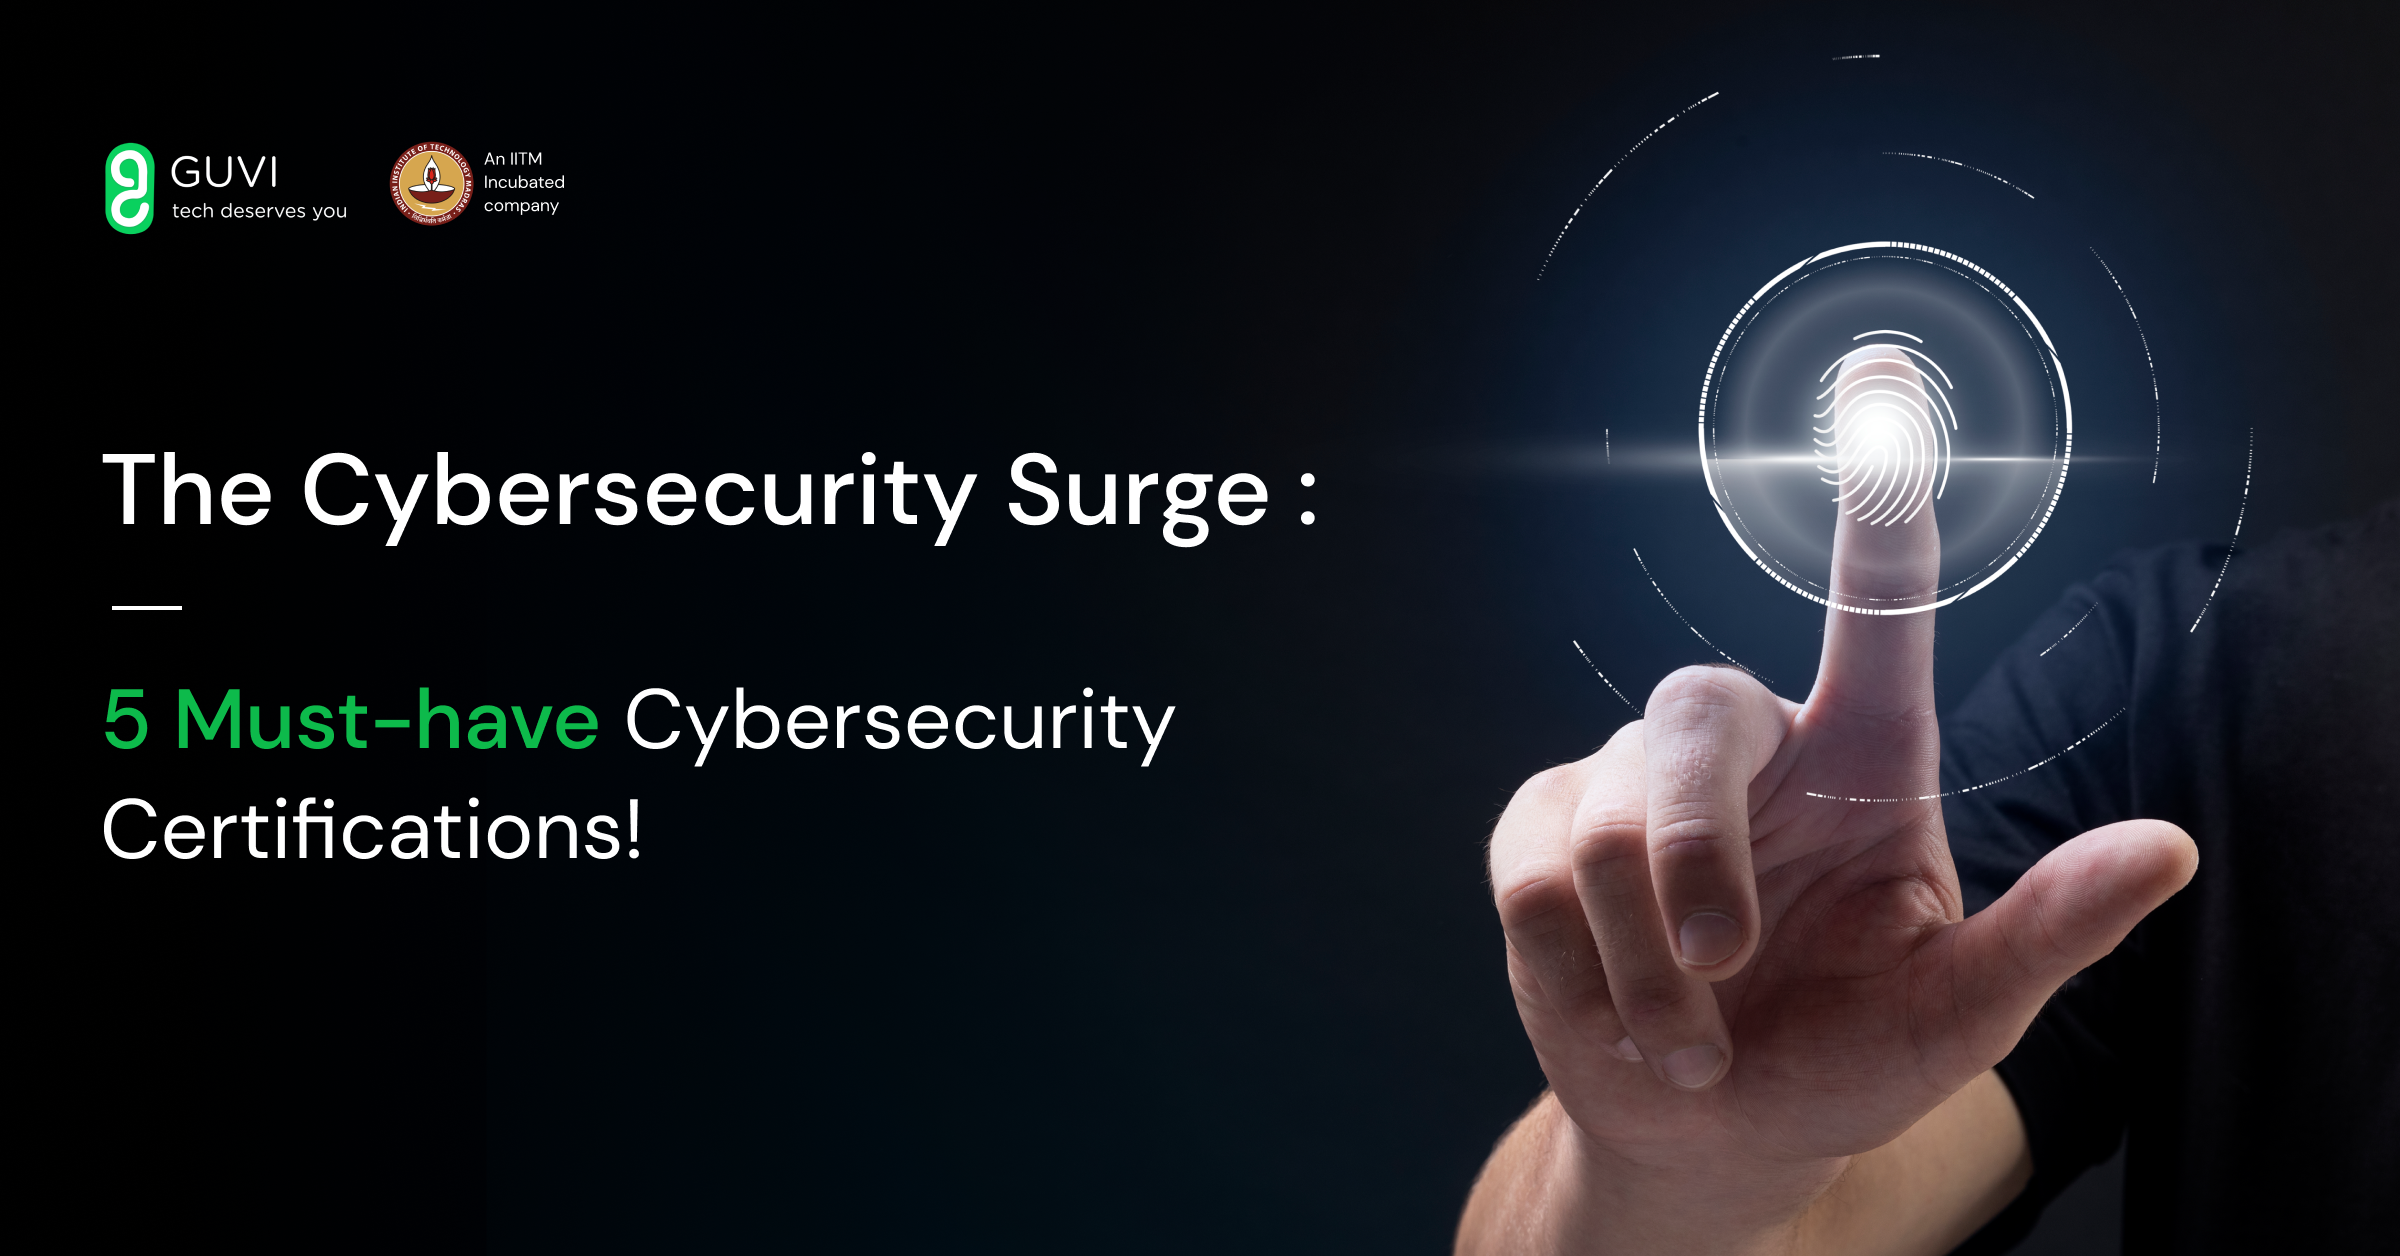 The Cybersecurity Surge: 5 Must-Have Cybersecurity Certifications